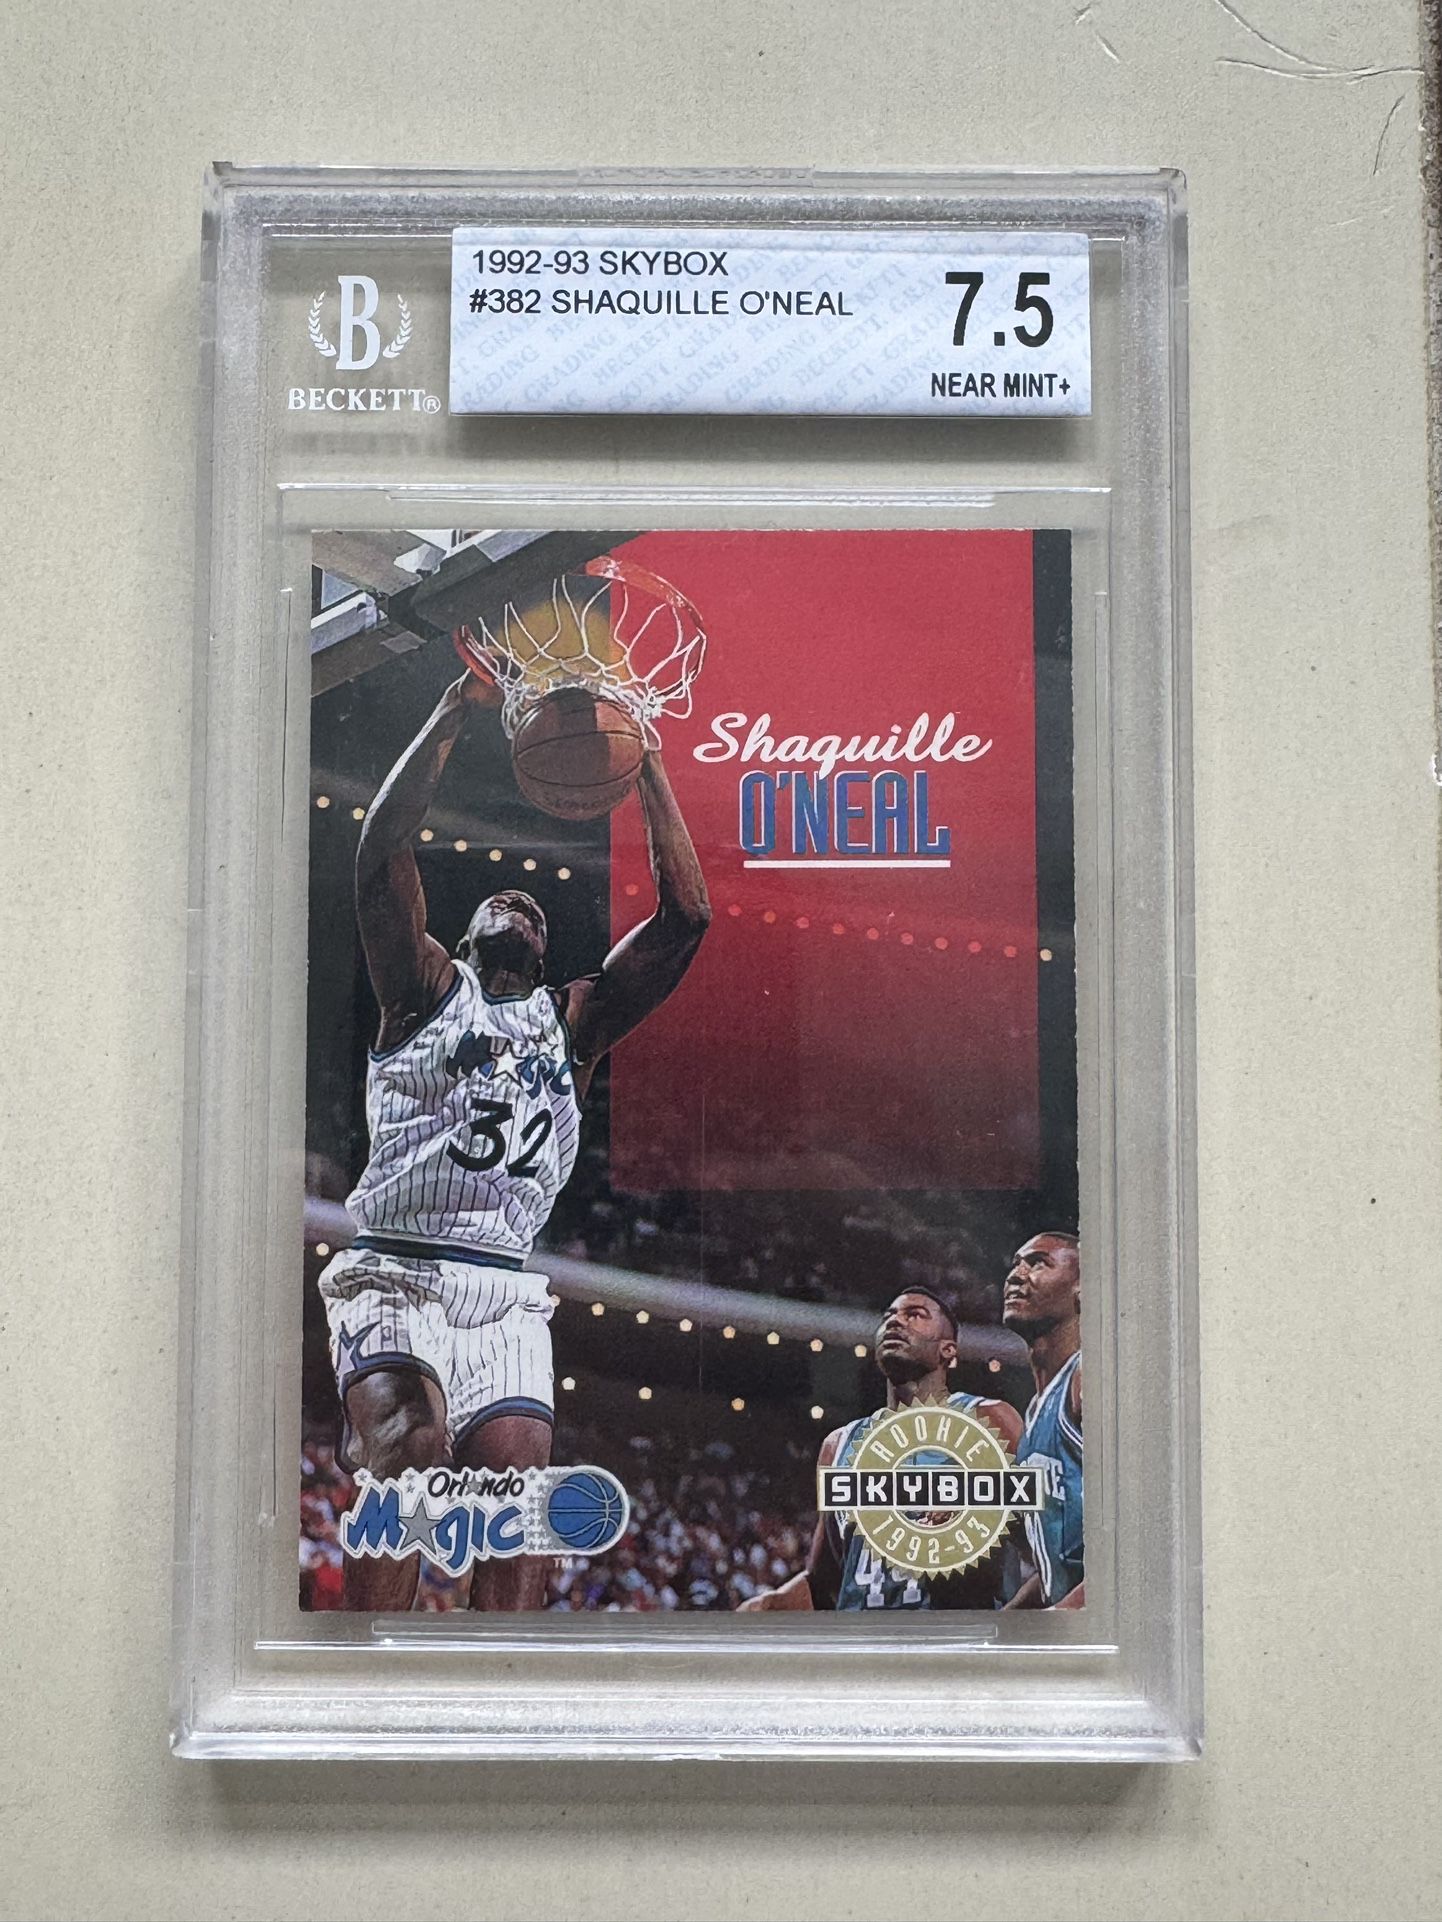 1992-93 Skybox Shaquille O’Neal Rookie #382 BGS 7.5 Orlando Magic, LA Lakers, LSU 